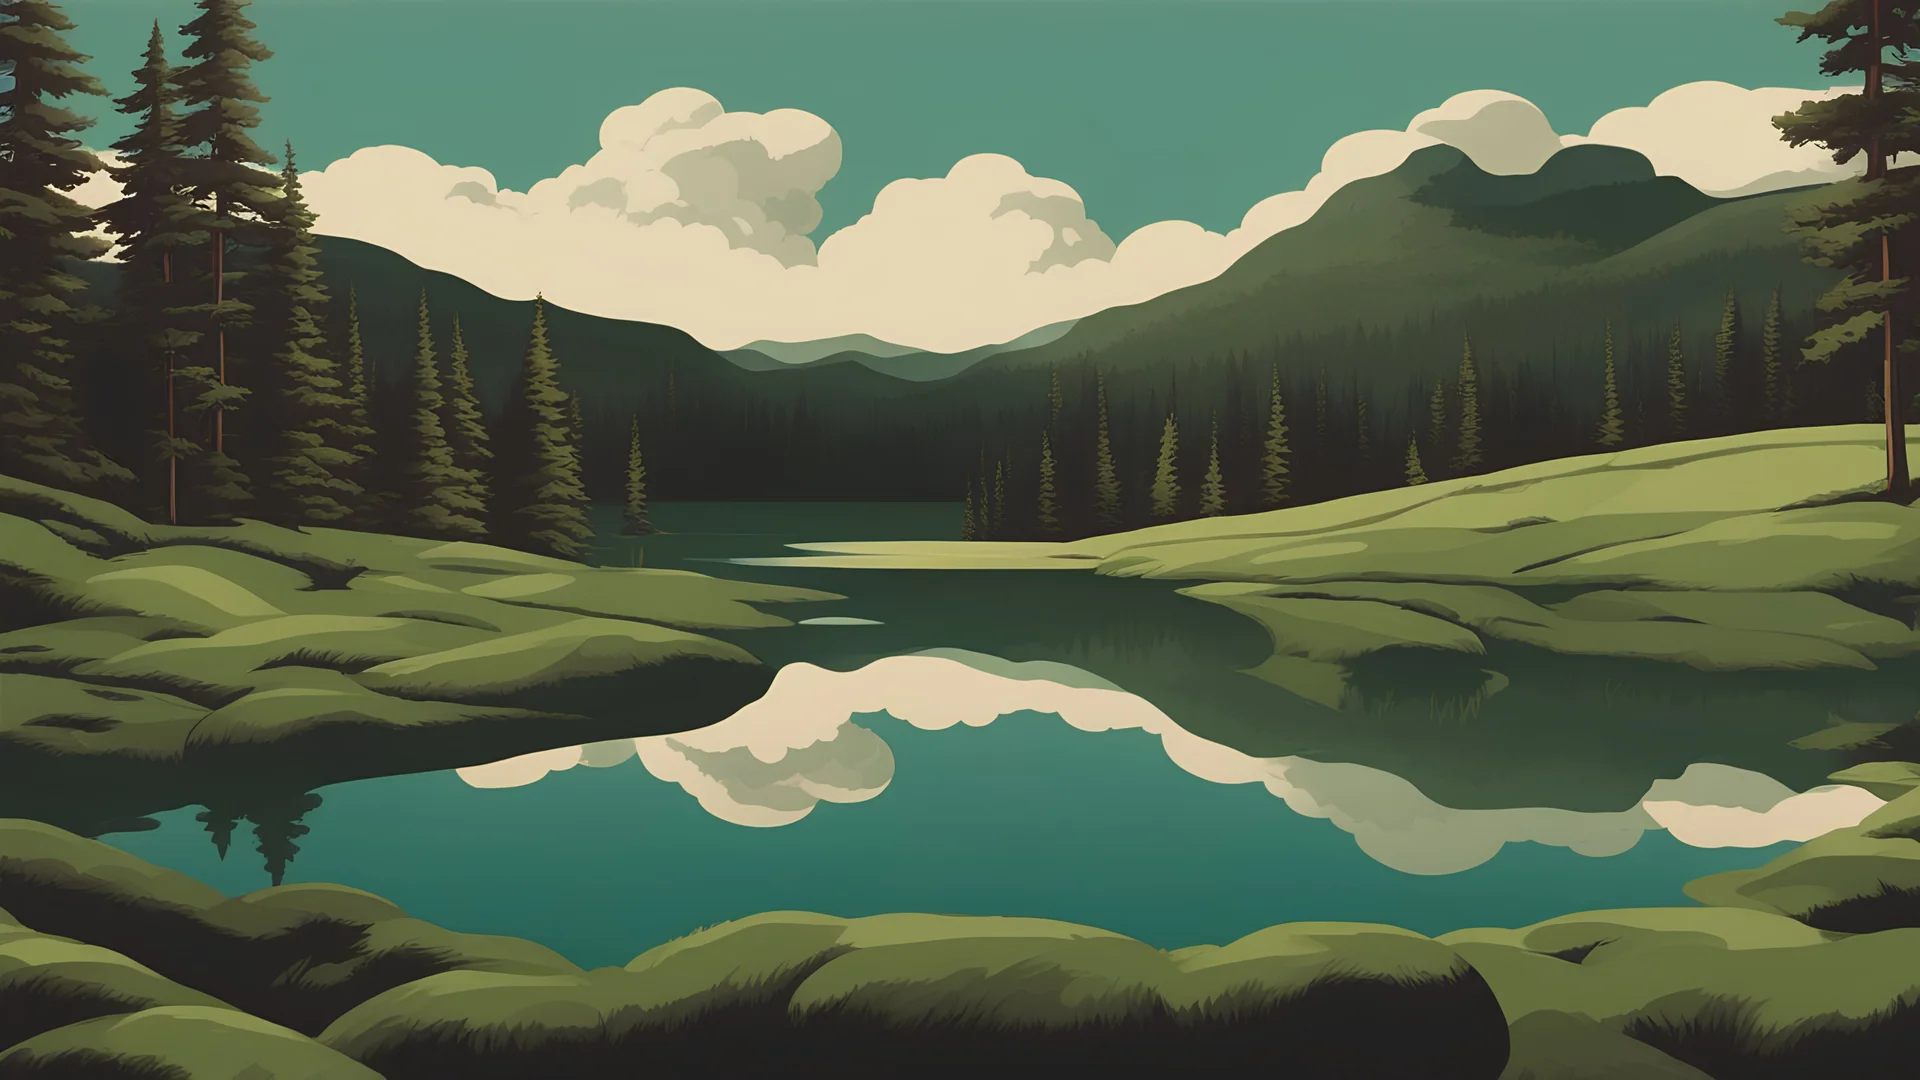 landscape :1.0 | trees green forest woodland :0.8 | vintage poster 1.0 | fluffy clouds in the distance :0.5 | realistic :0.5 | bold colors :0.3 | bright :0.7 | in the style of USA national park posters :1.0 | lake :1.0 | dark green:0.7 | Swedish archipeligo :1.0